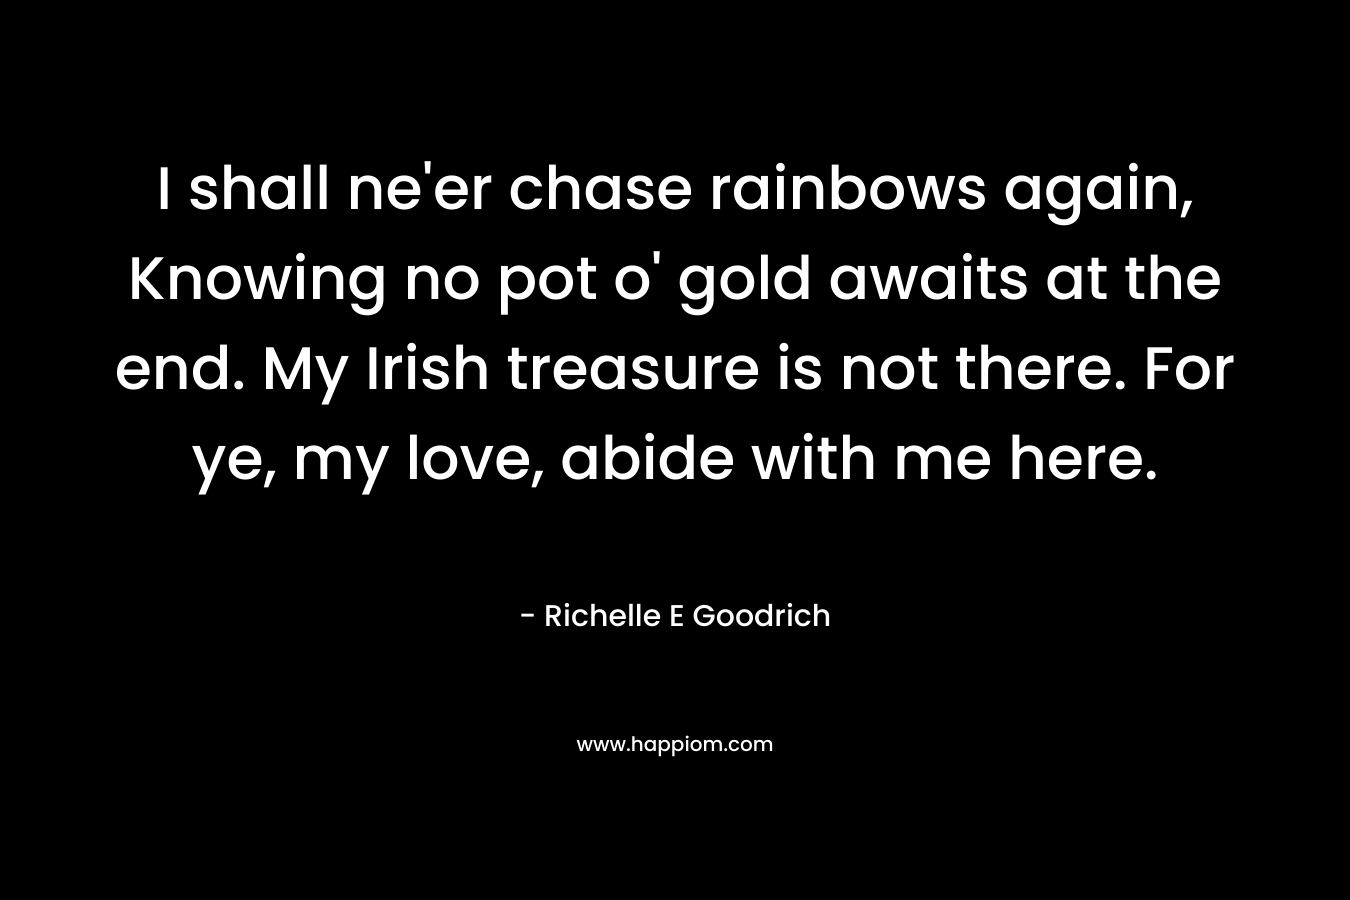 I shall ne’er chase rainbows again, Knowing no pot o’ gold awaits at the end. My Irish treasure is not there. For ye, my love, abide with me here. – Richelle E Goodrich